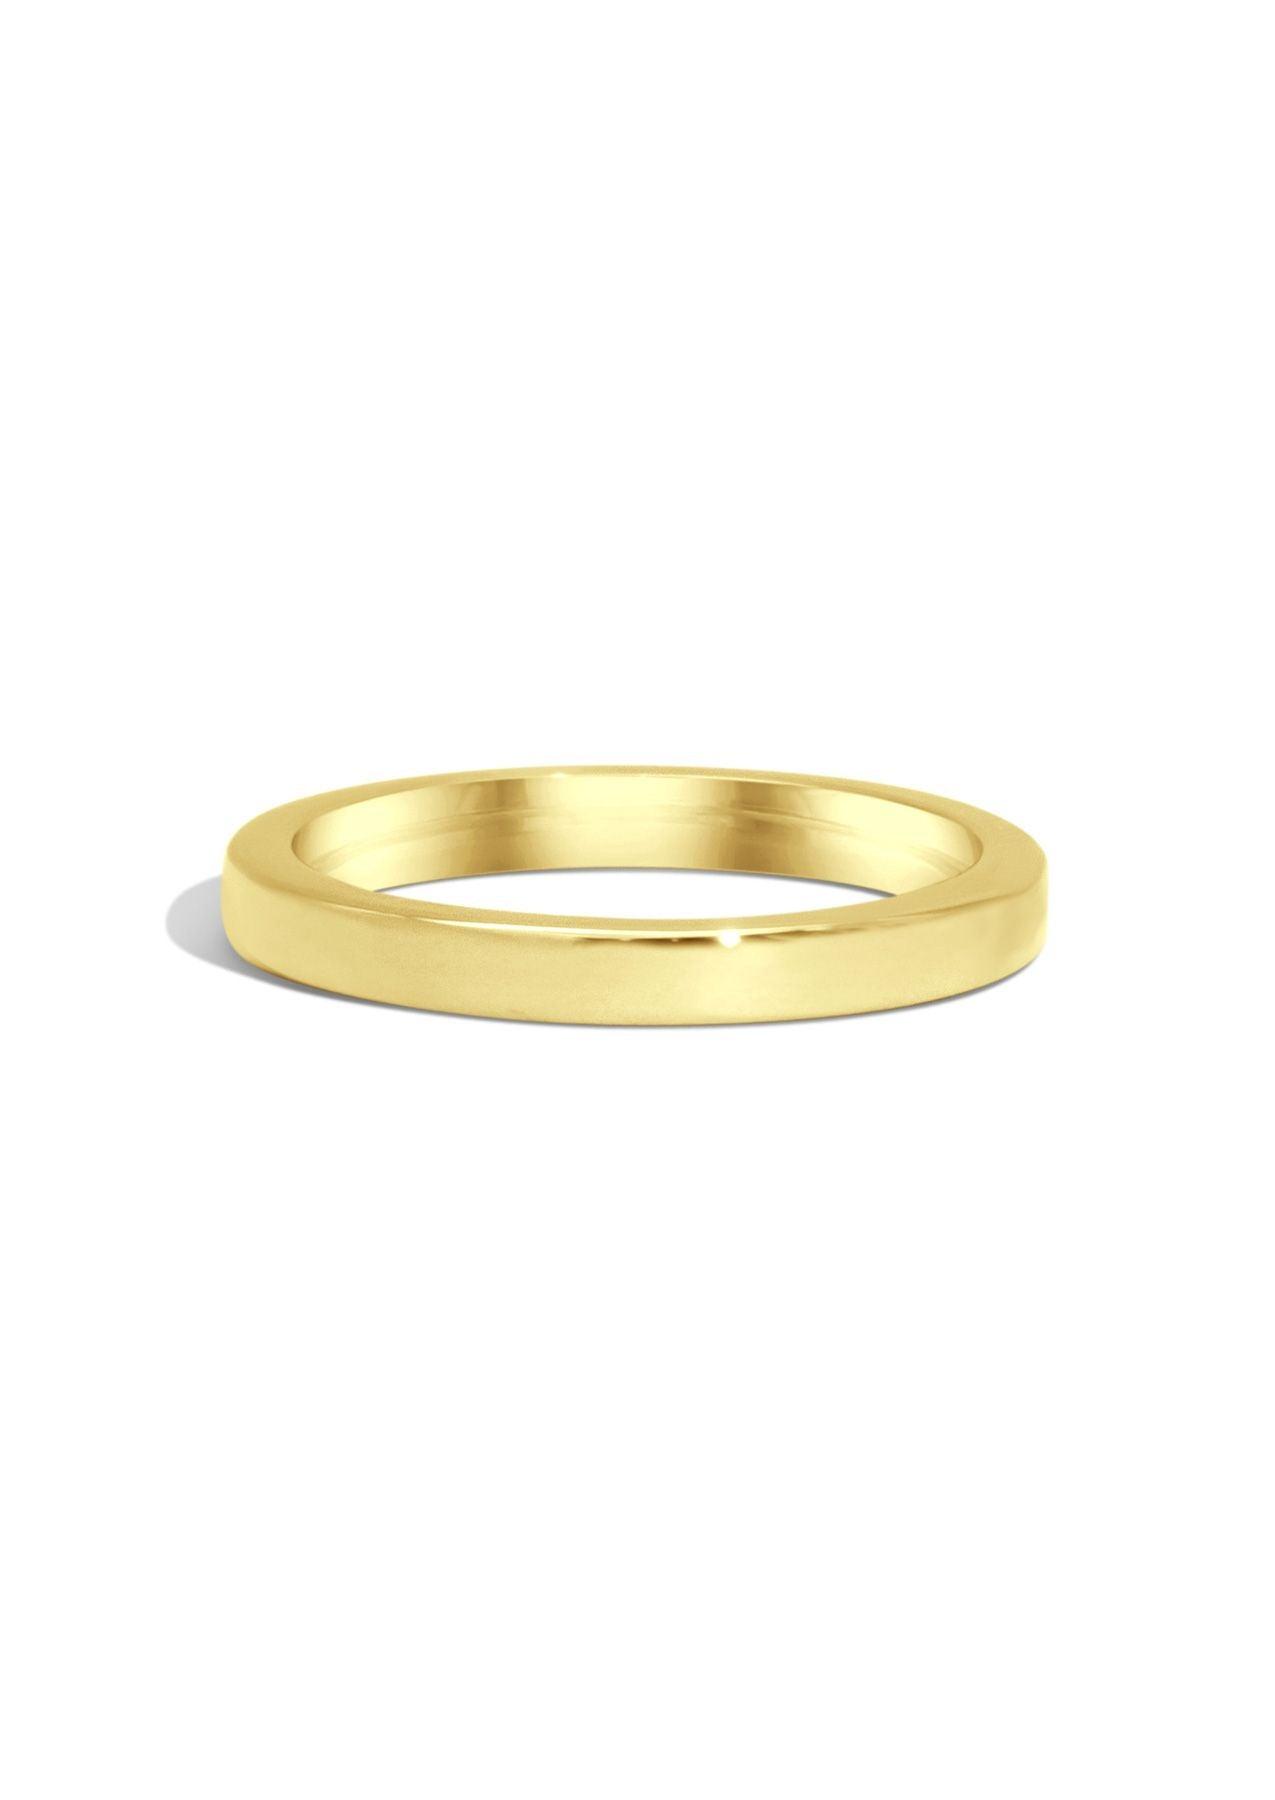 The Arc Yellow Gold Band